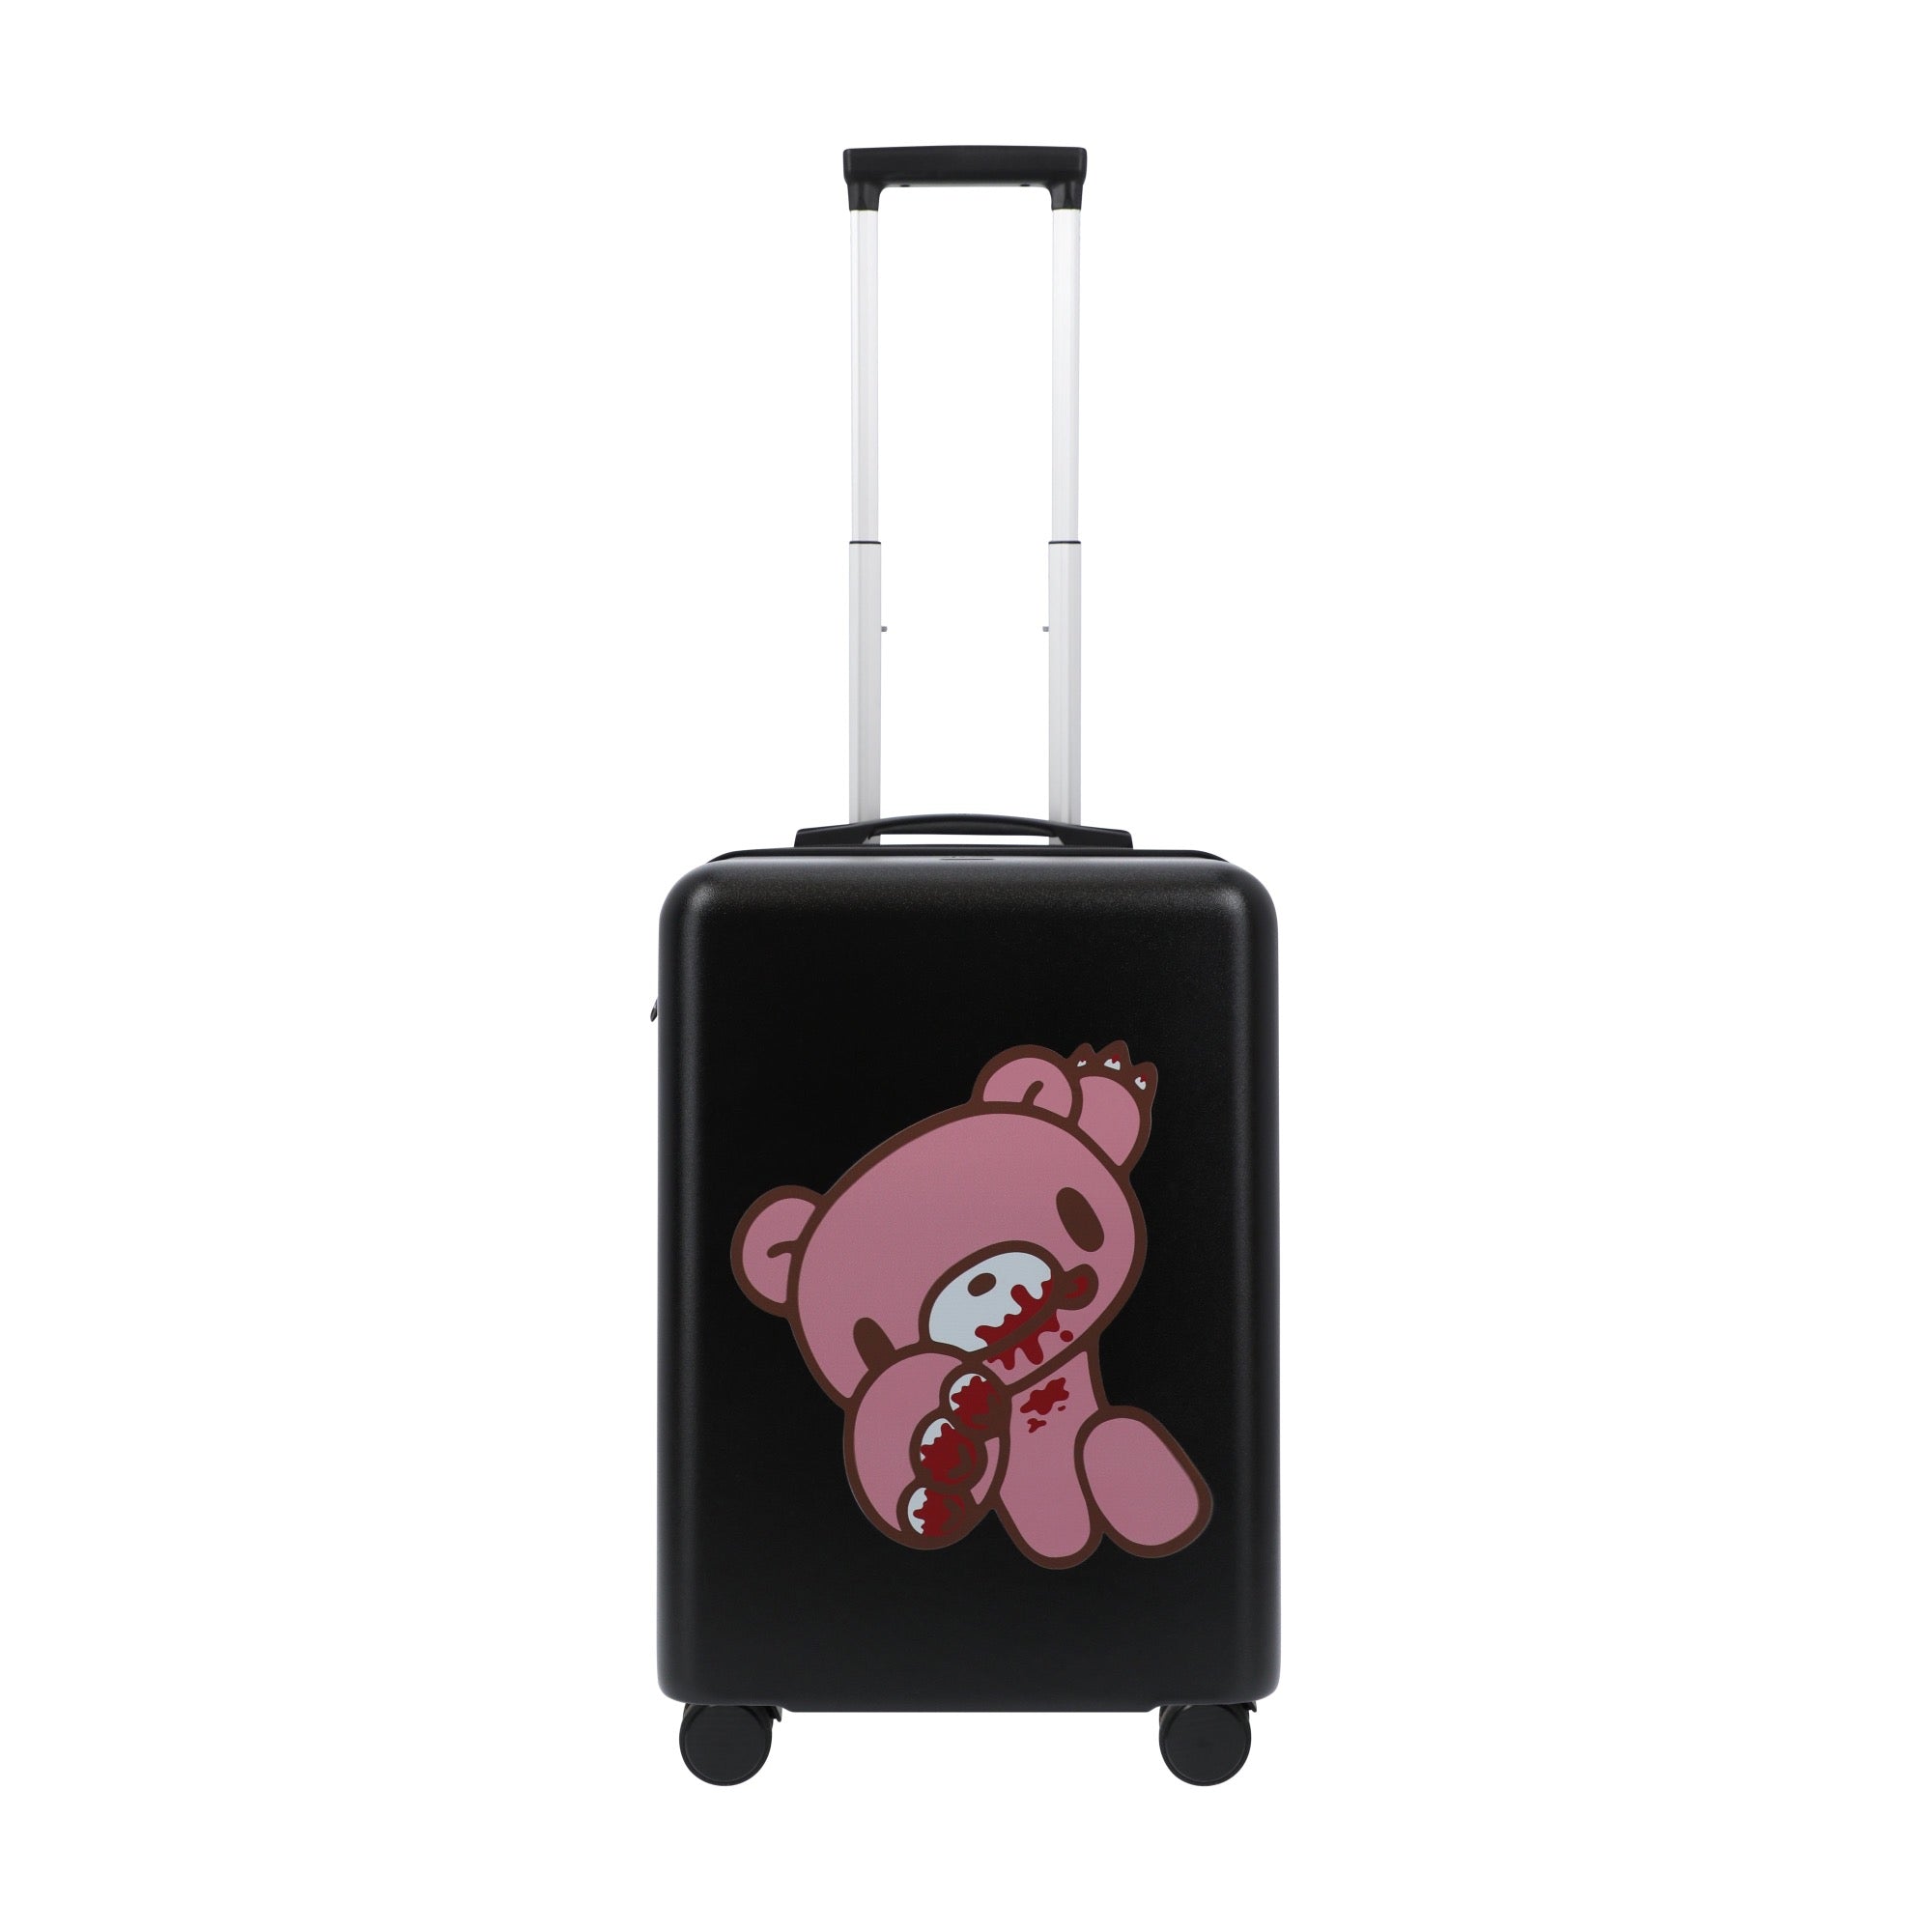 Black octas gloomy bear 22.5" carry-on spinner suitcase luggage by Ful